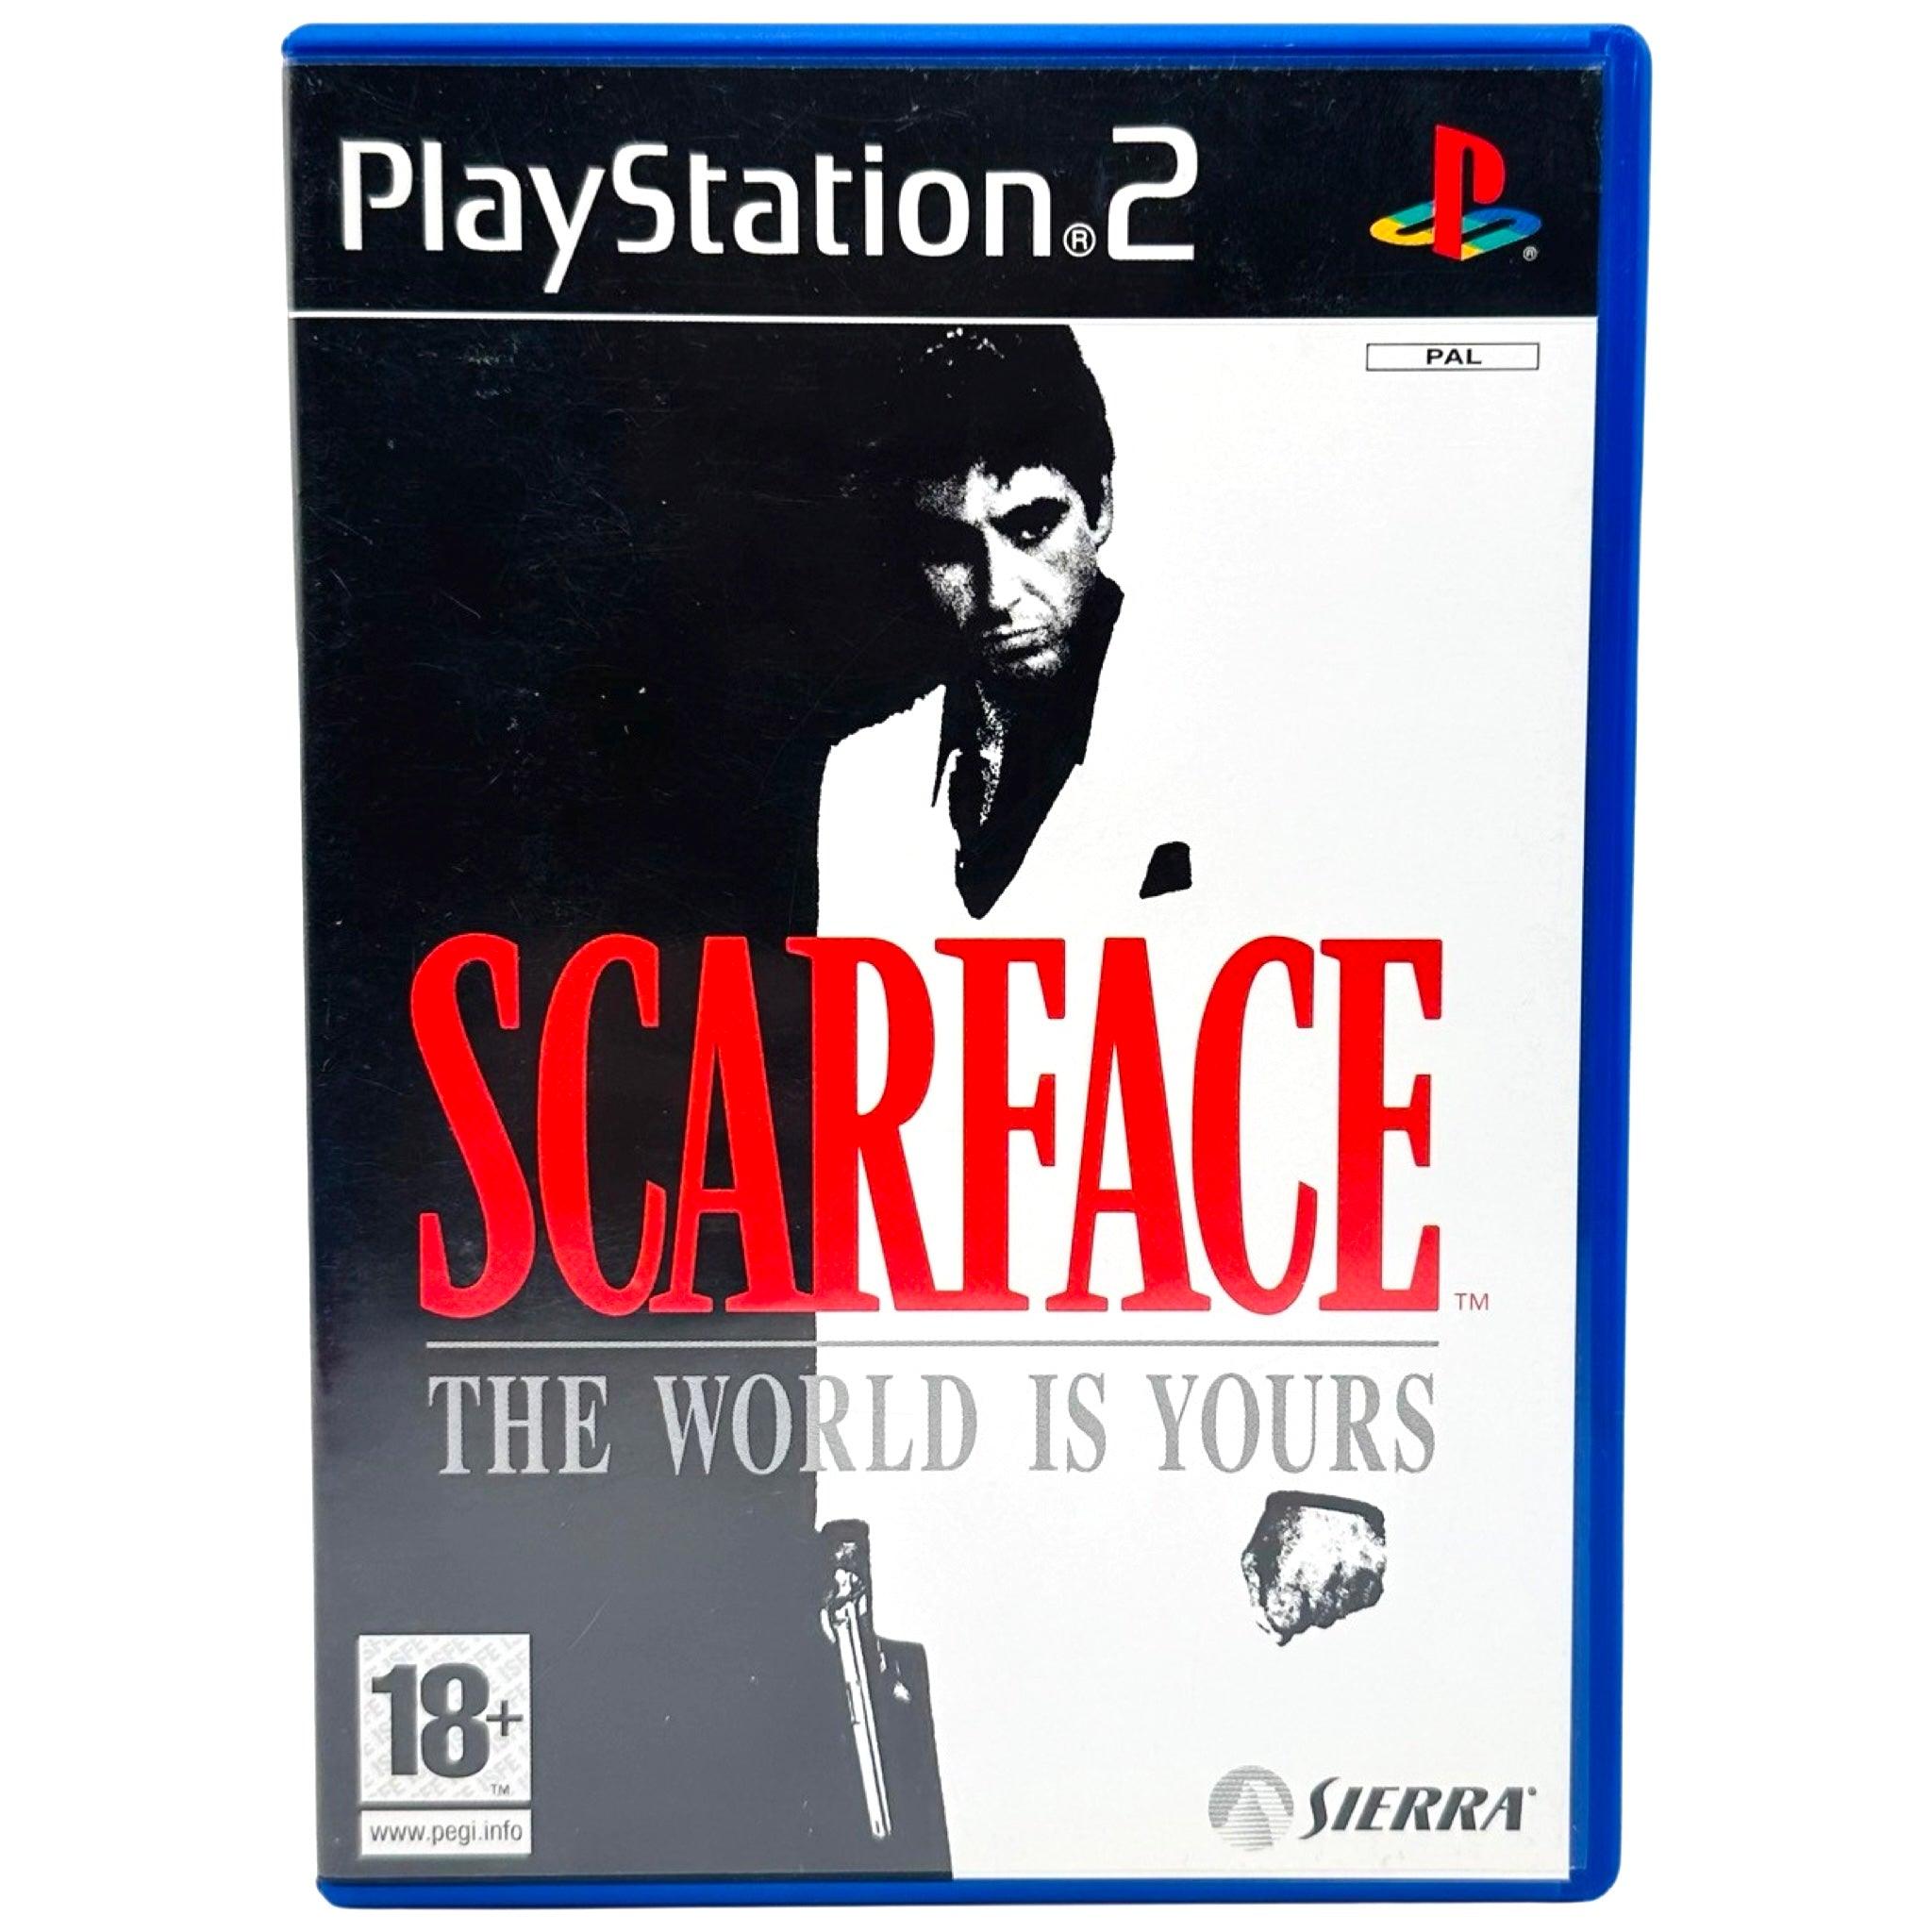 PS2: Scarface The World Is Yours - RetroGaming.no